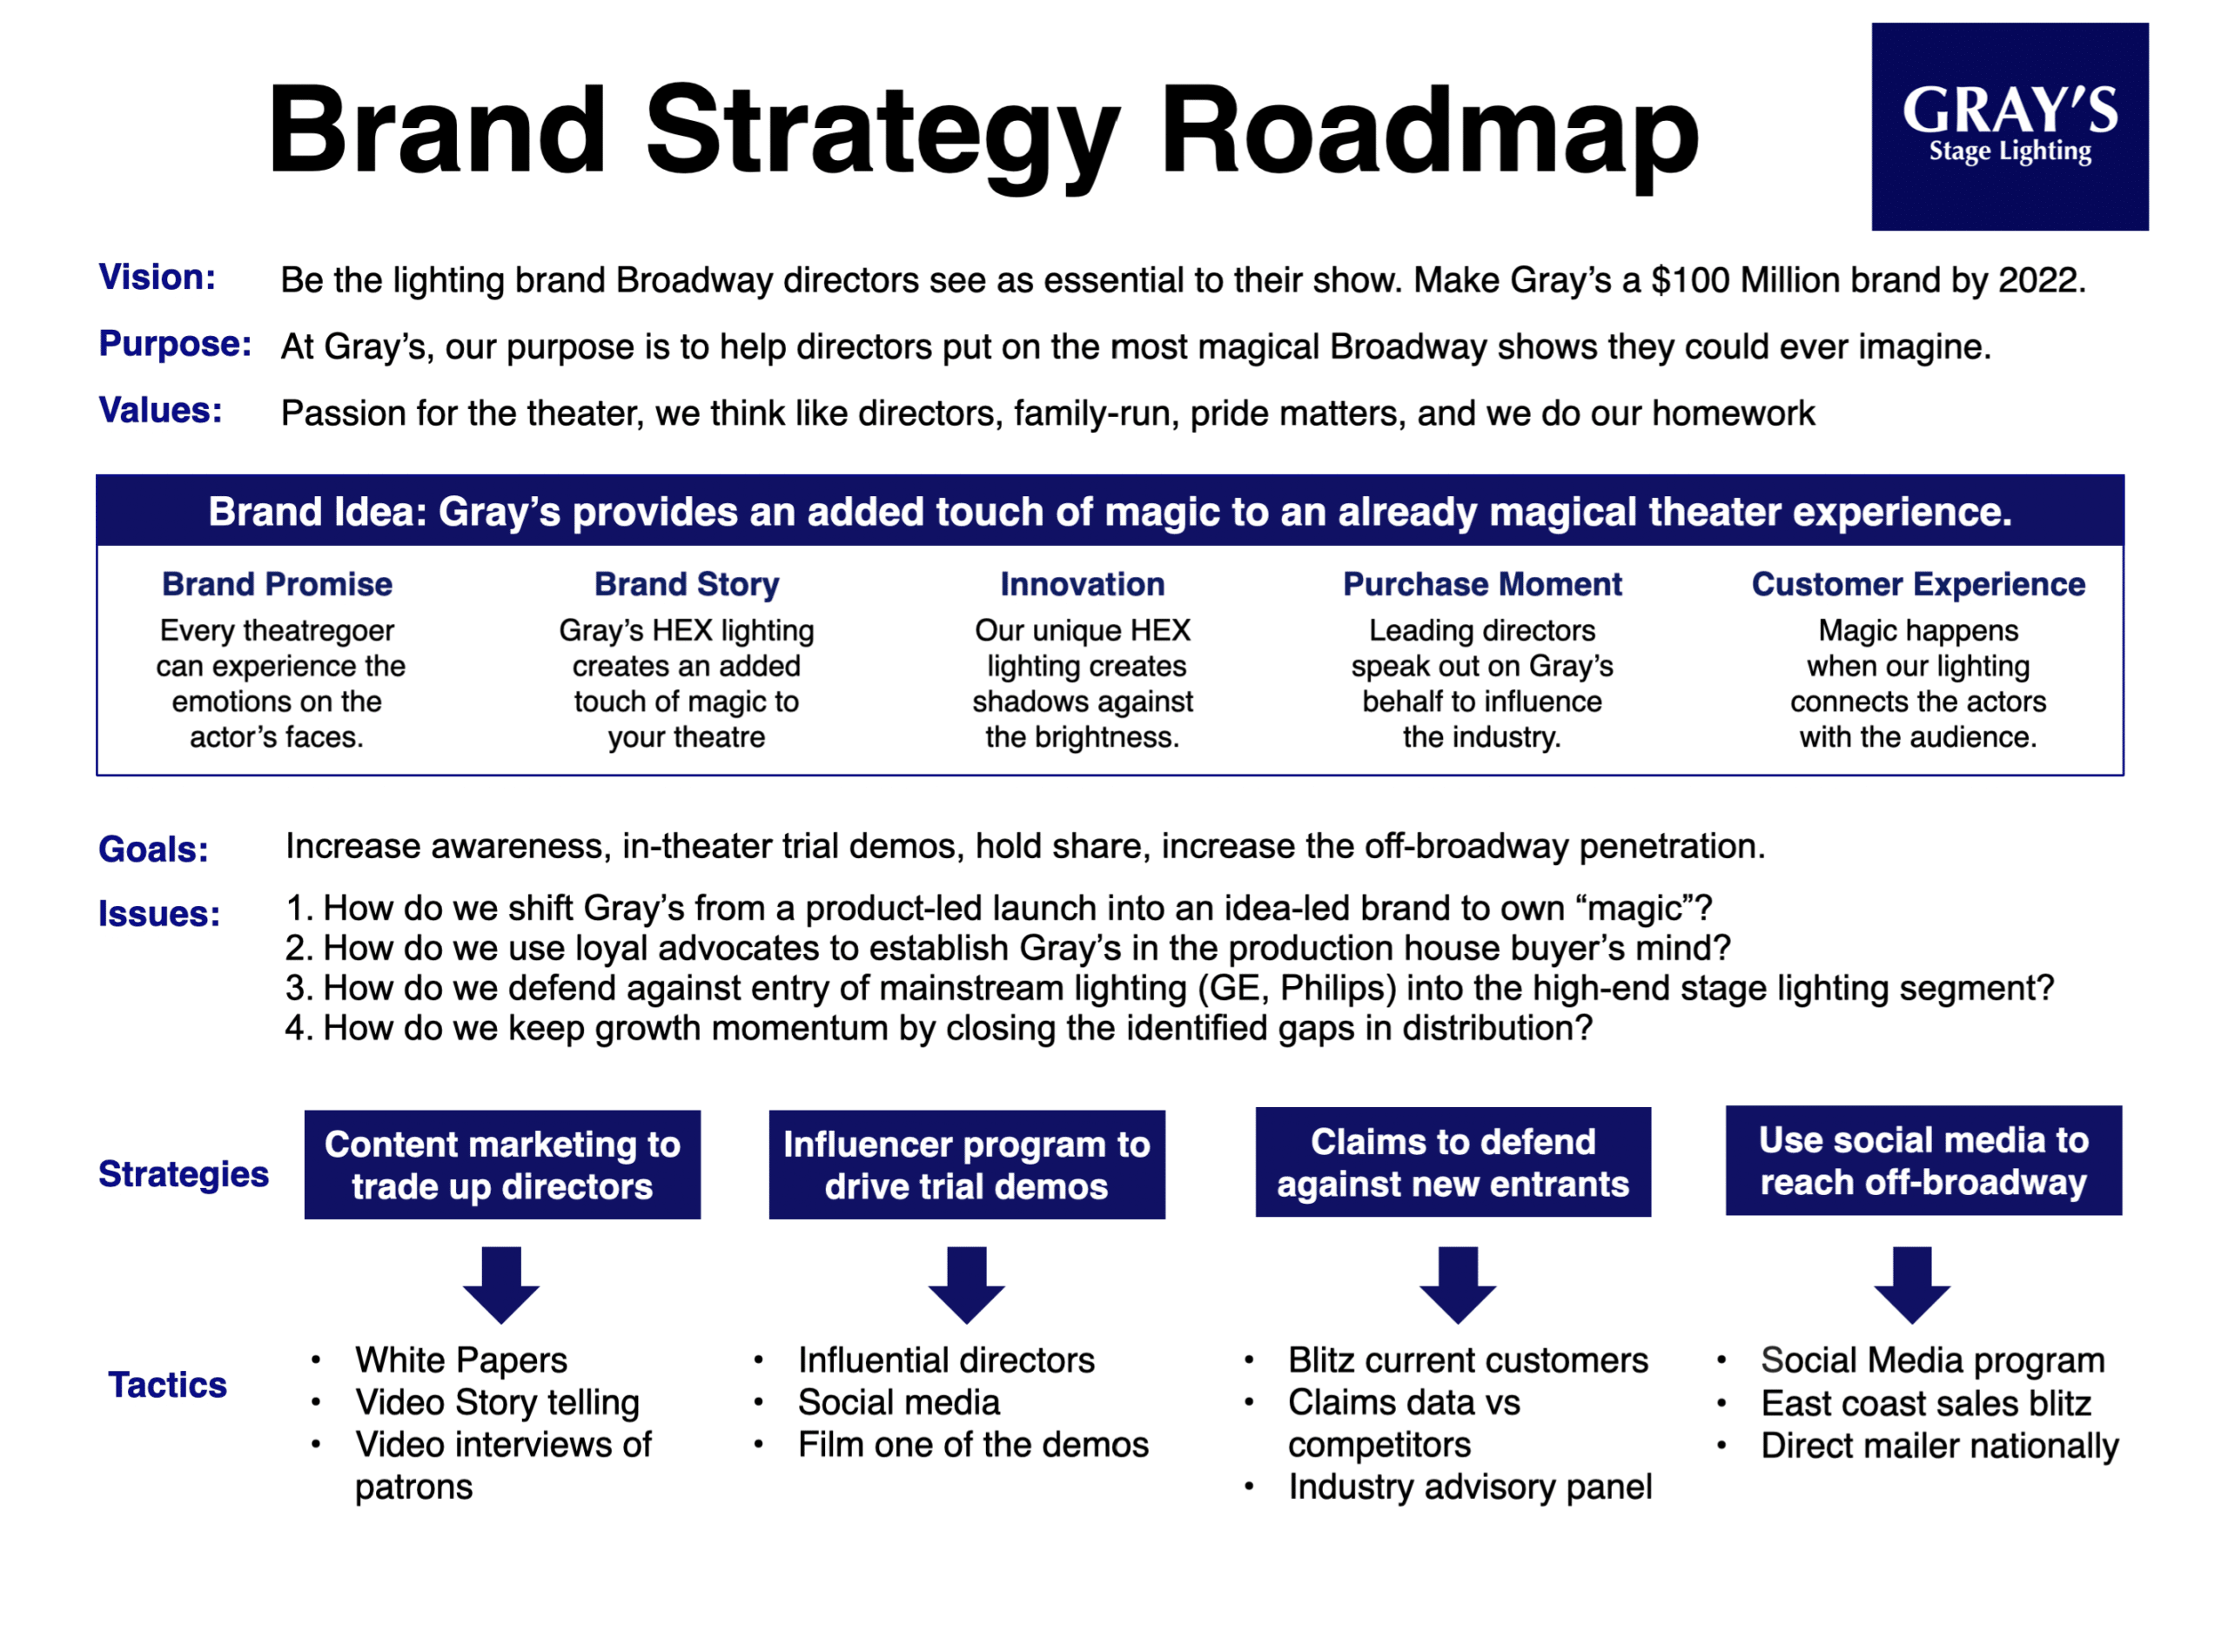 A Better Way to Map Brand Strategy